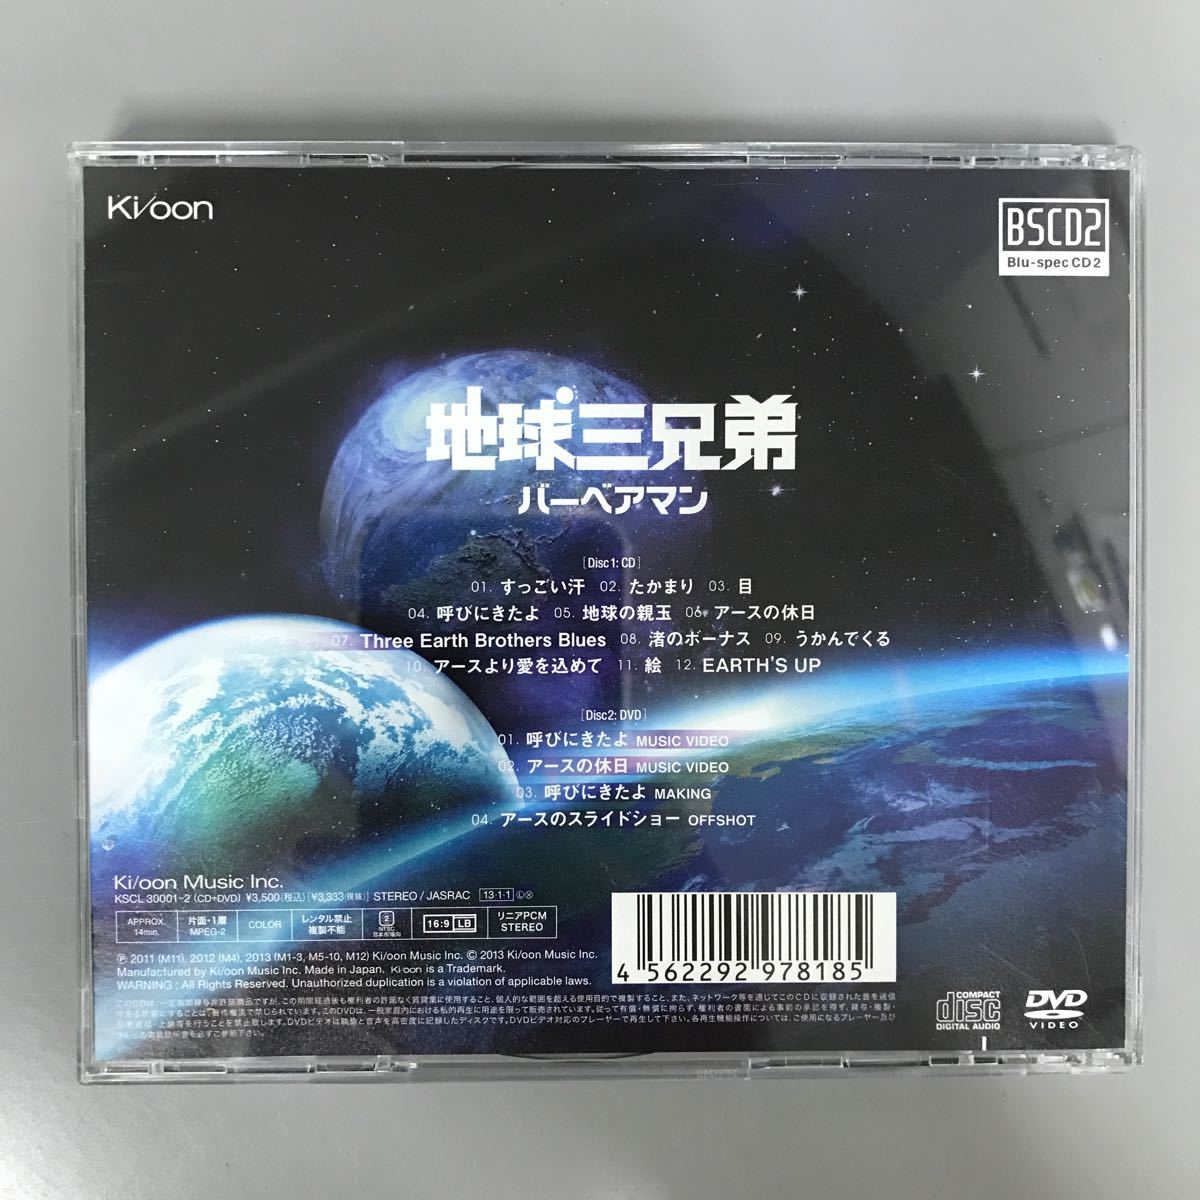 D218)中古CD100円 地球三兄弟 バーベアマン(初回生産限定盤) product details | Yahoo! Auctions Japan  proxy bidding and shopping service | FROM JAPAN